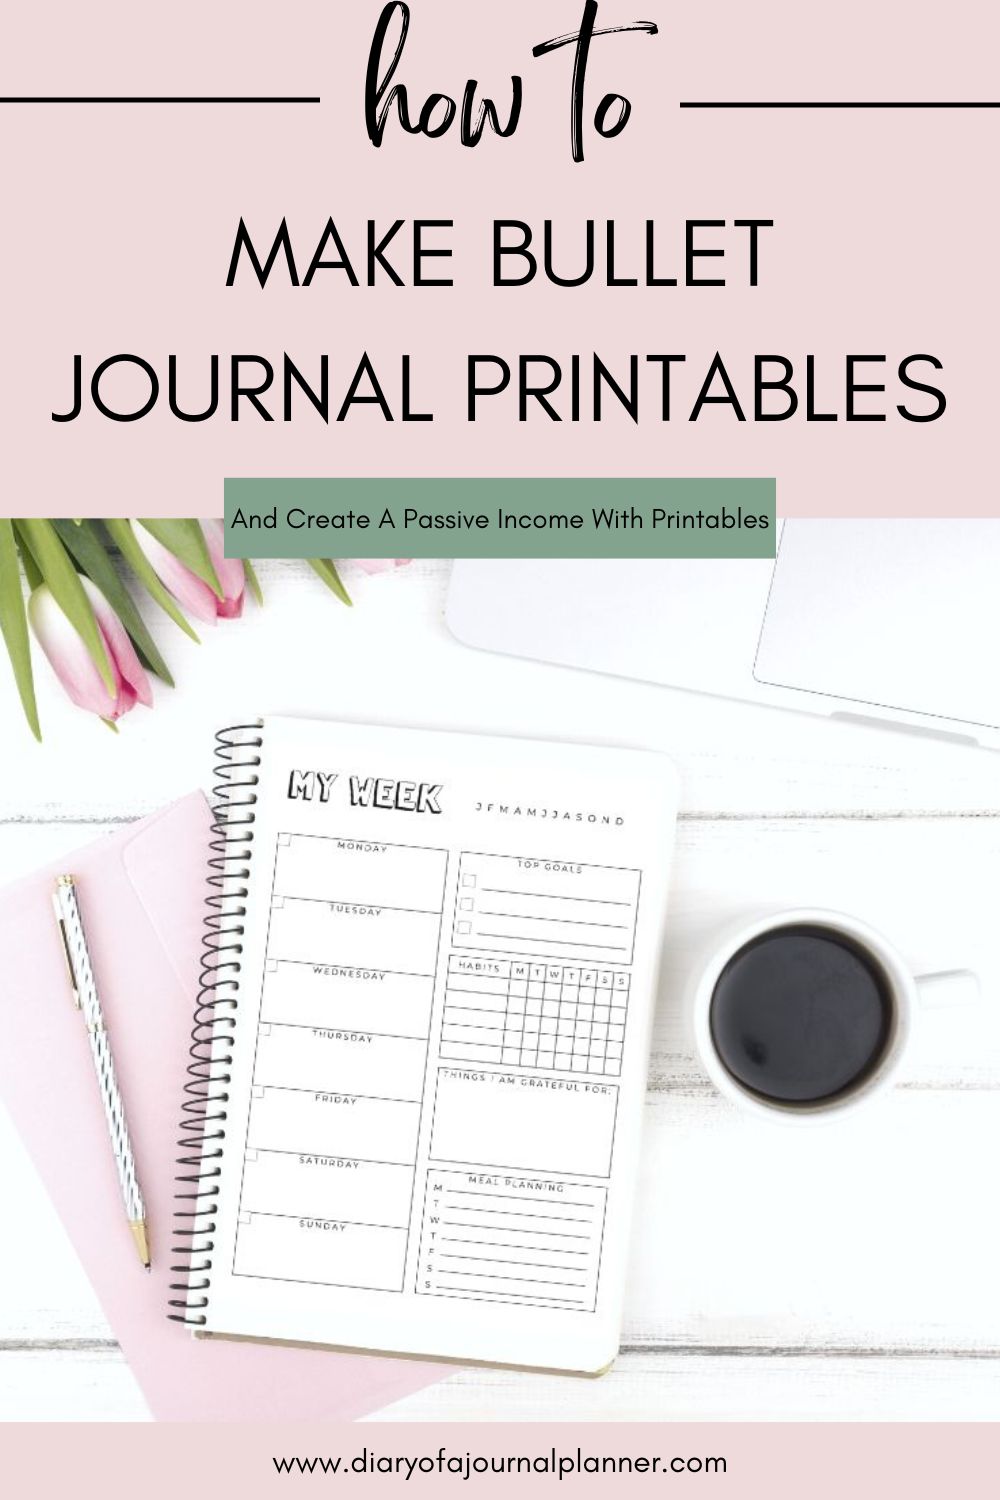 Creating Personalized Bullet Journal Printables